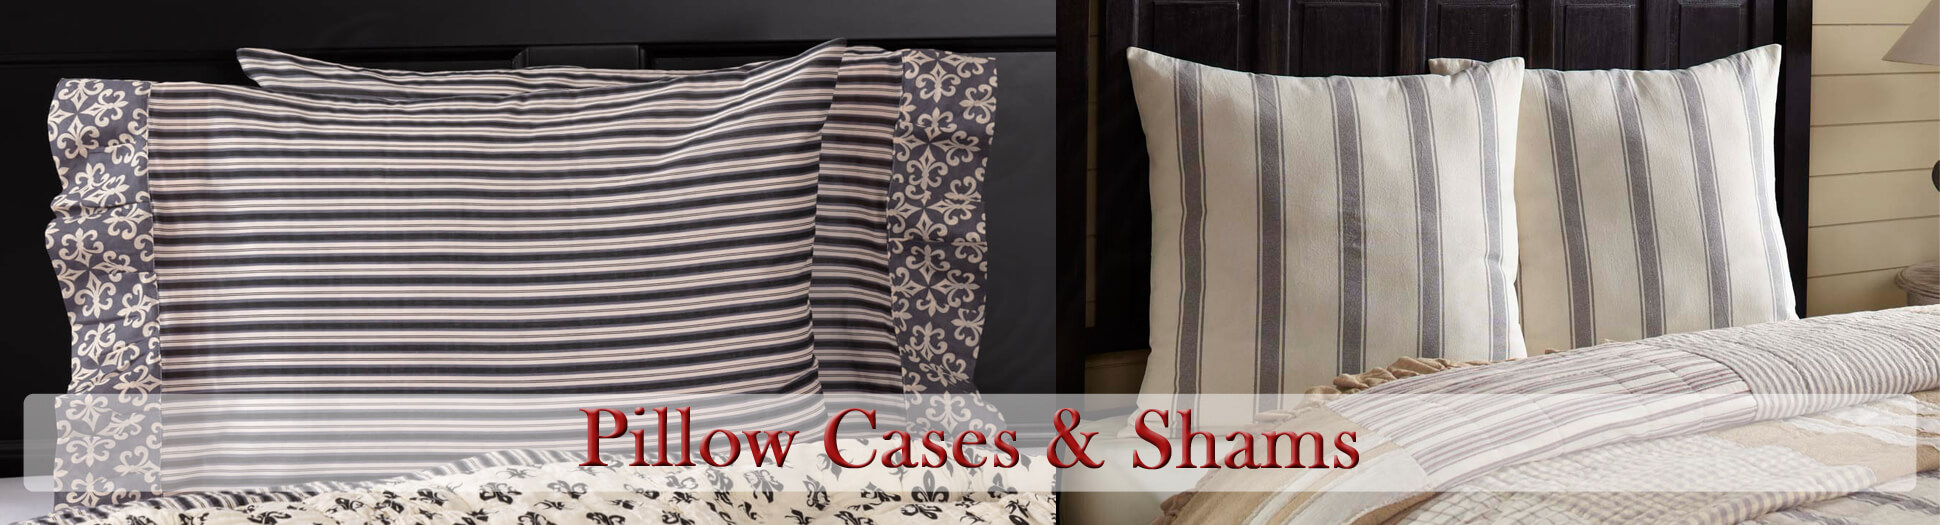 Pillow Cases and Shams